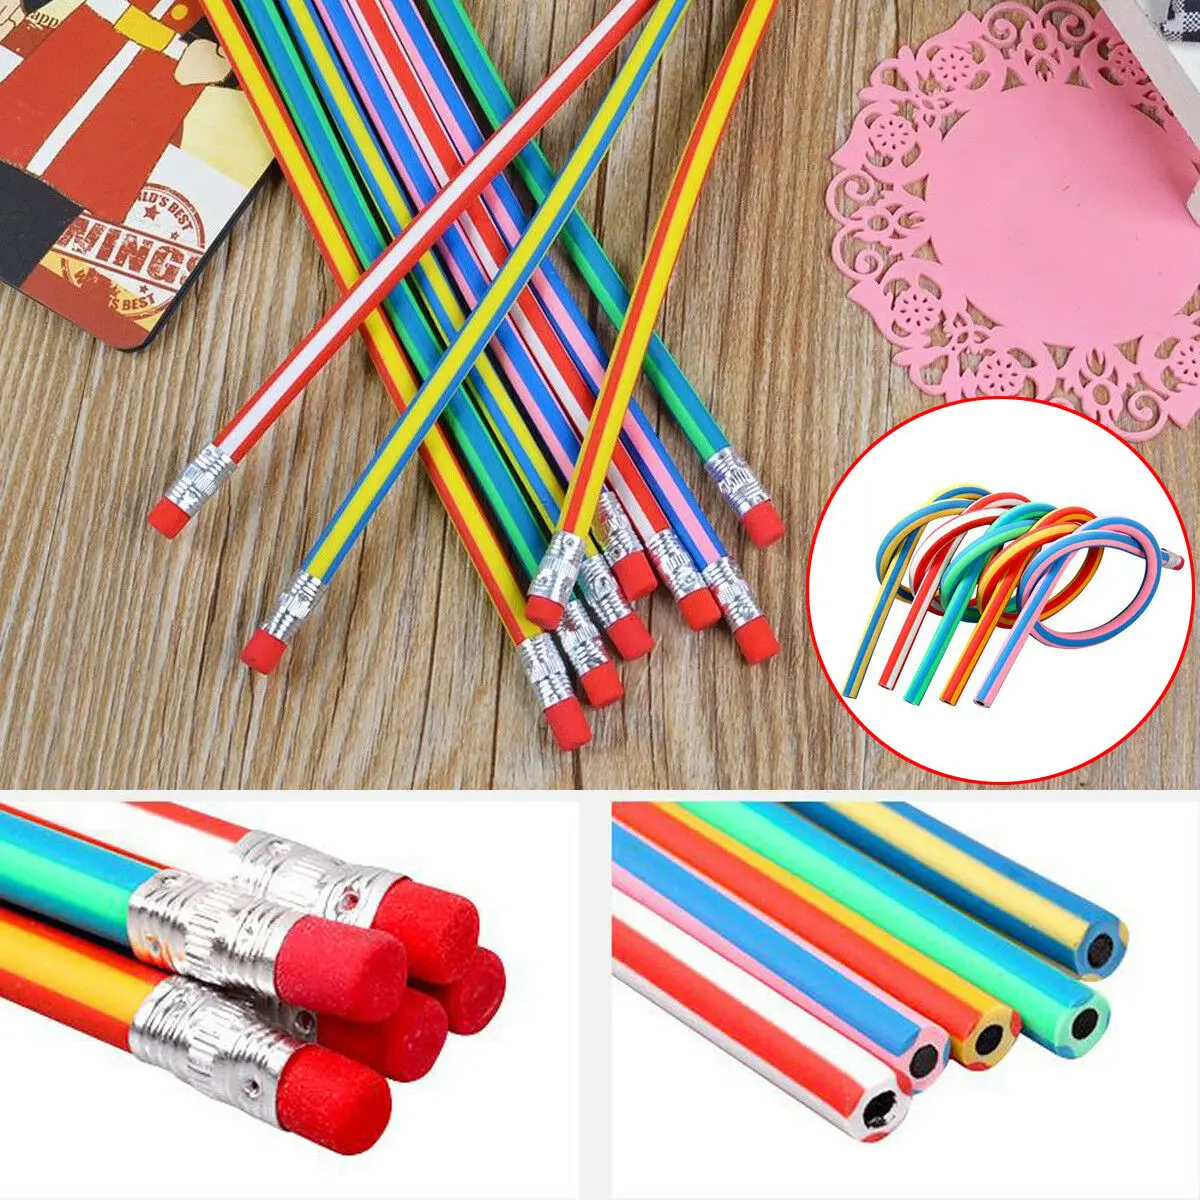 Magic Safe Bend Rubber Pencil with Eraser for School Kids Children Writing Gift Fun Equipment Flurries ✏️ 15/30/60 Pcs Colorful Soft Flexible Bendy Pencils 